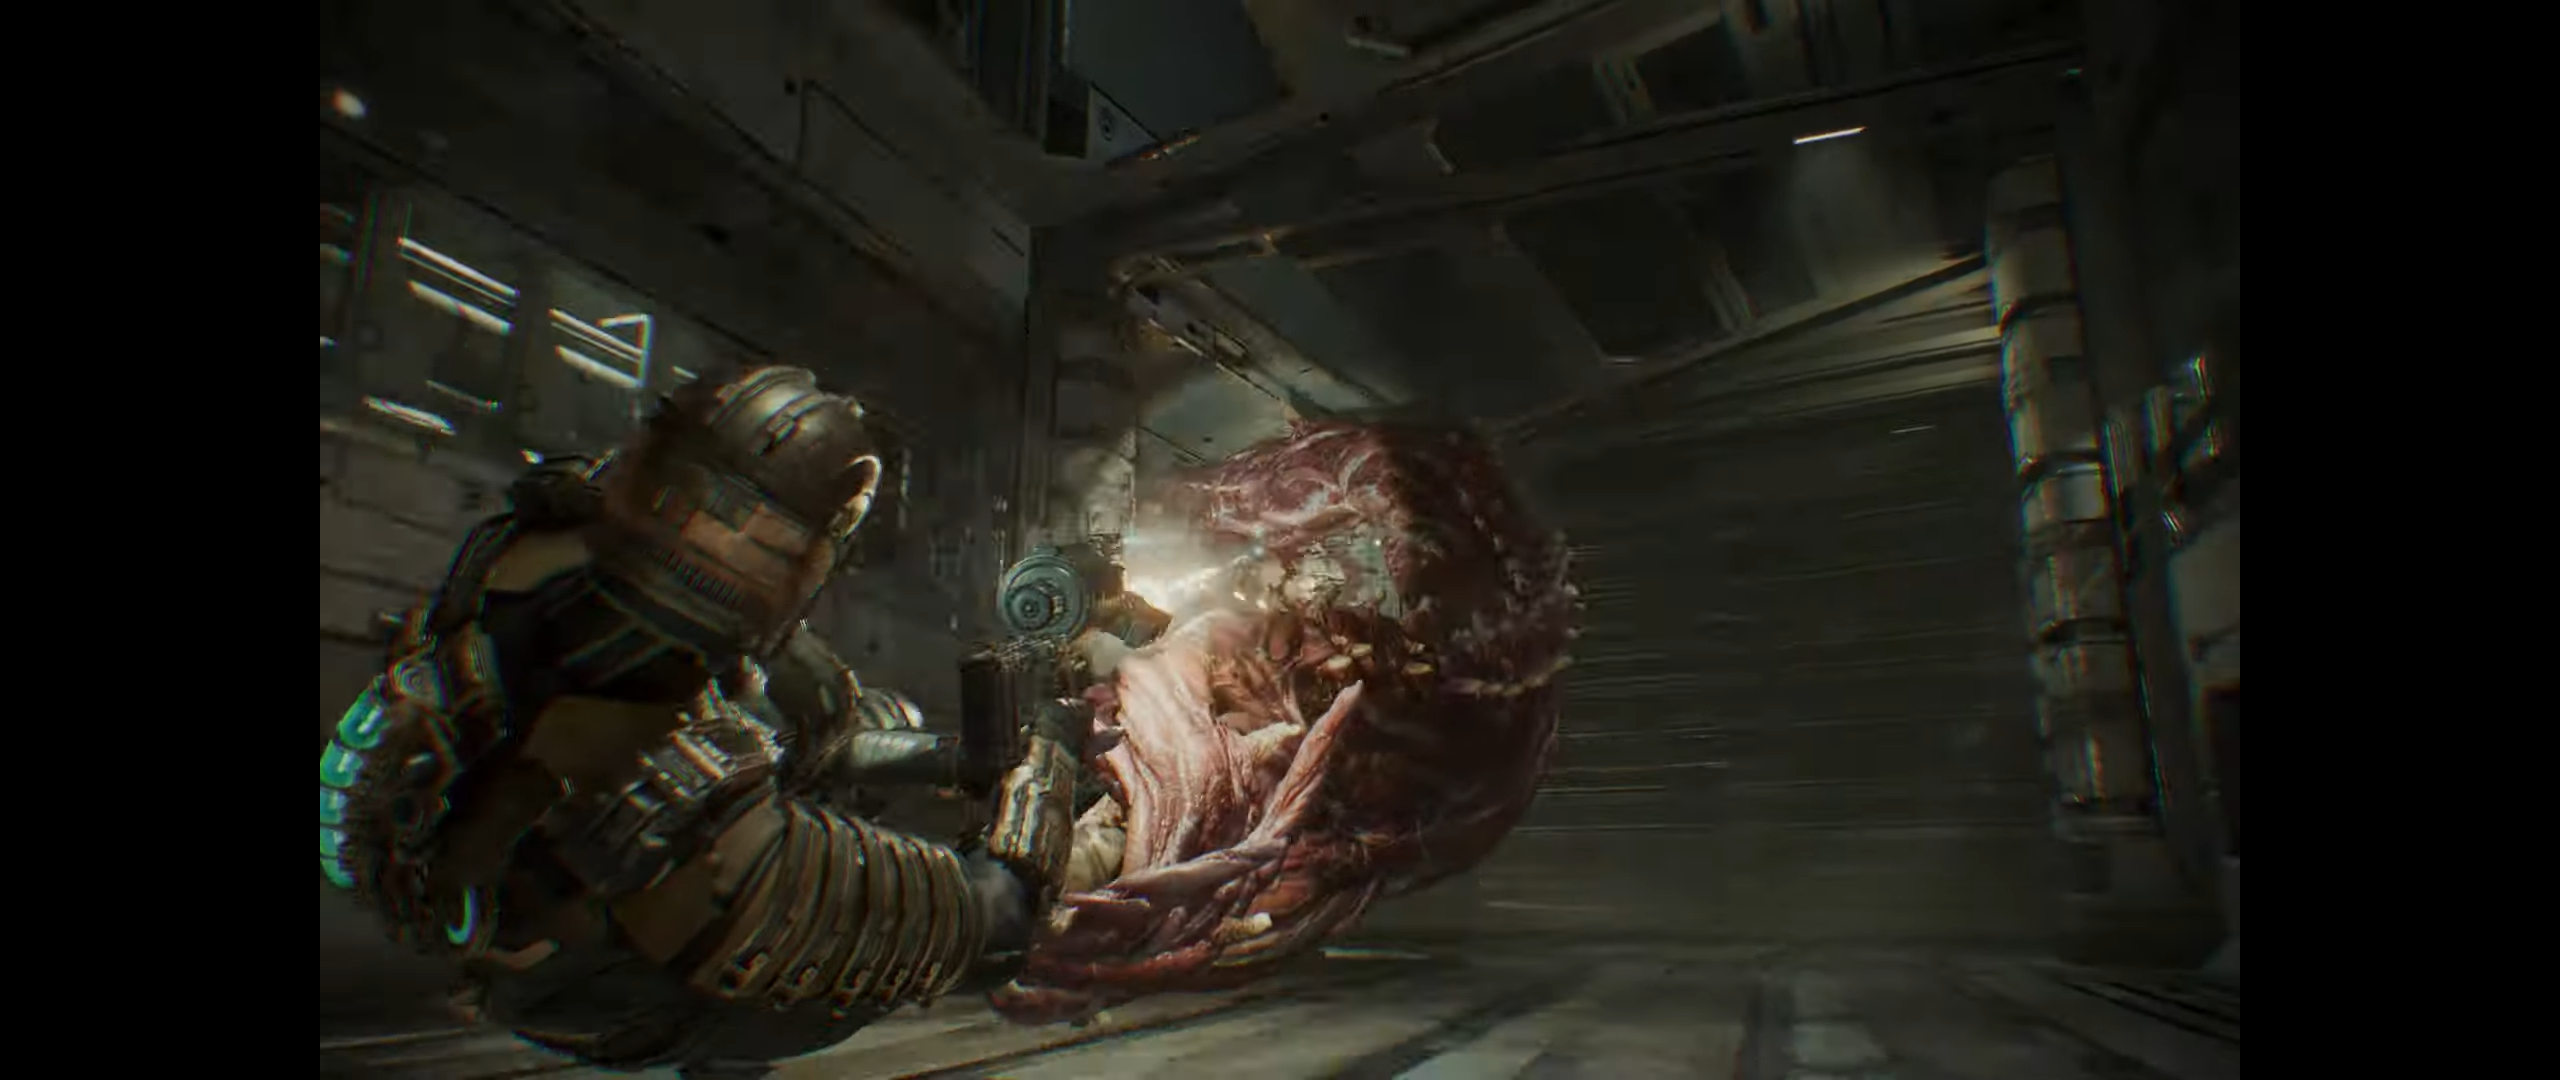 Dead Space remake gameplay shown off in all its gory glory thumbnail